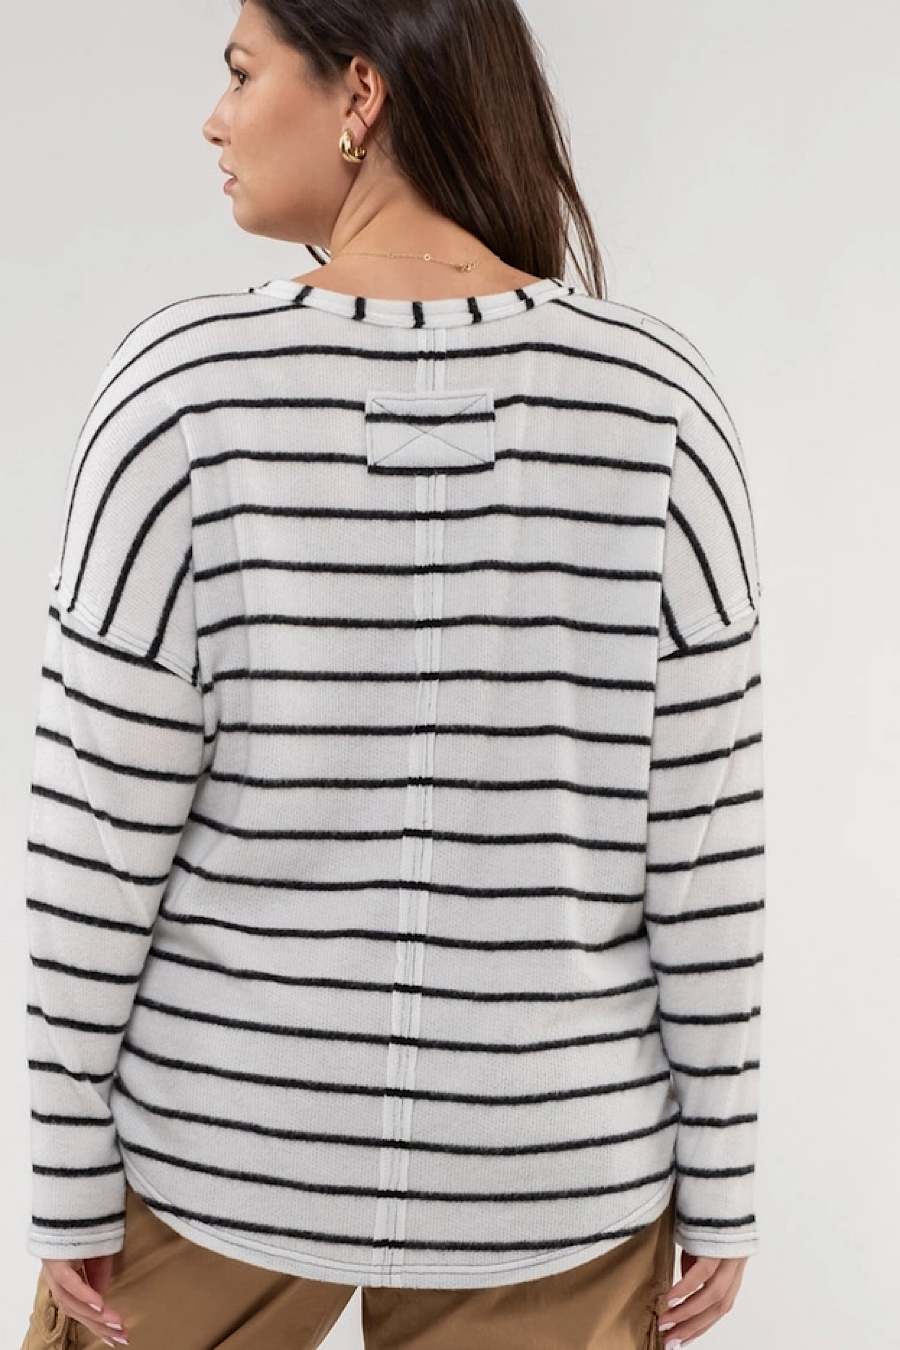 Curvy Plus Size Coffee & Conquer Striped Top